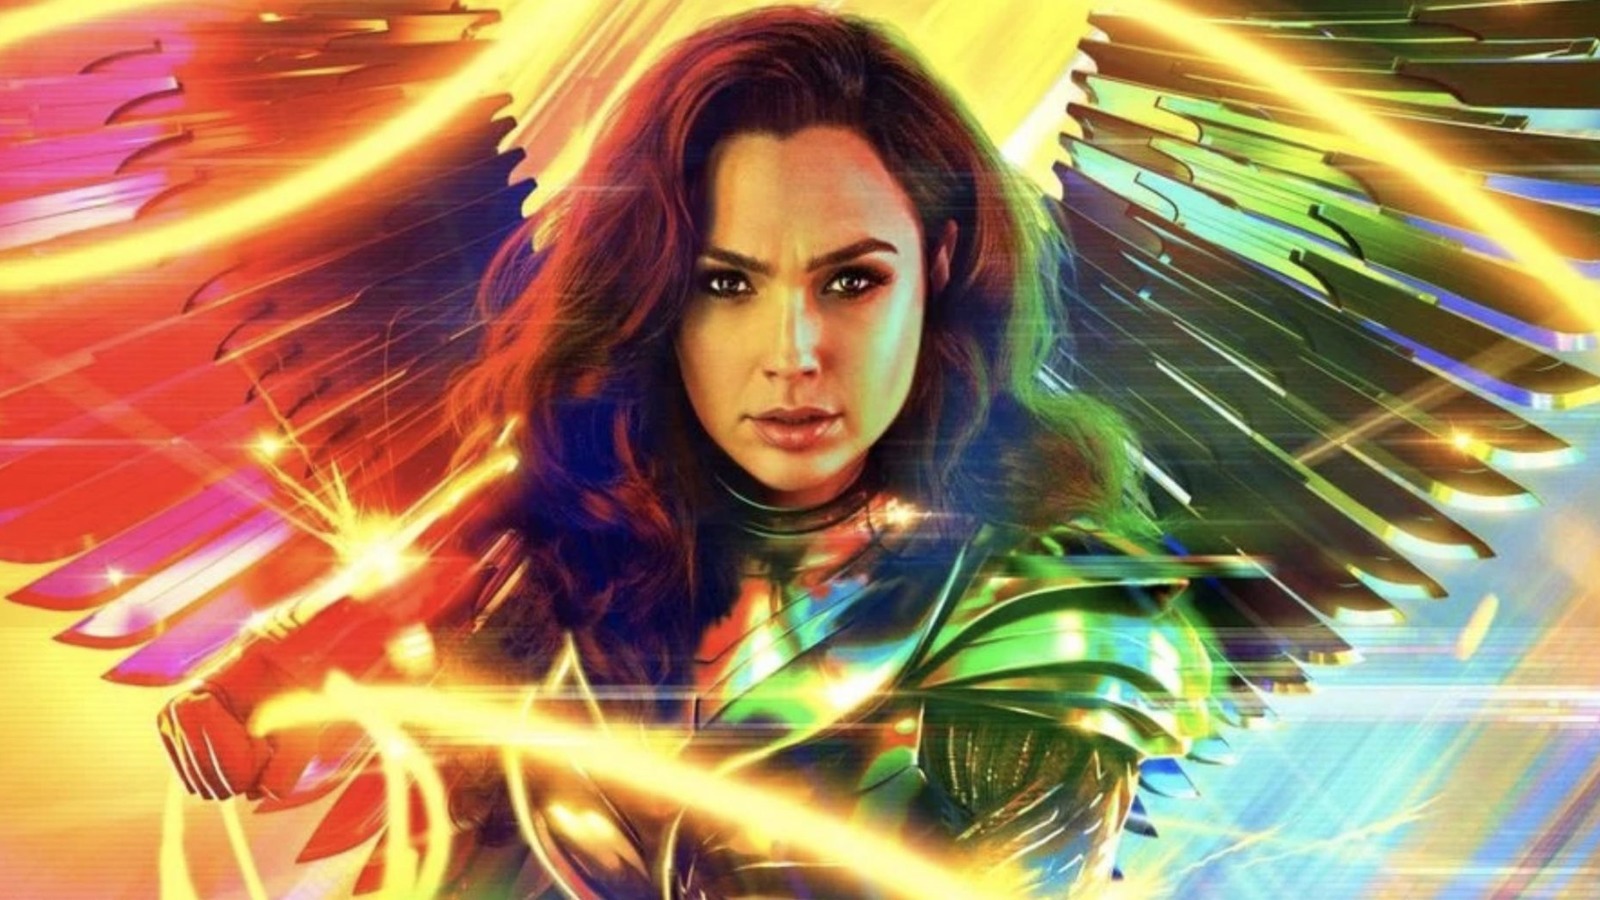 Gal Gadot Opens Up About Wonder Woman 1984, '80s Fashion, Spoilers